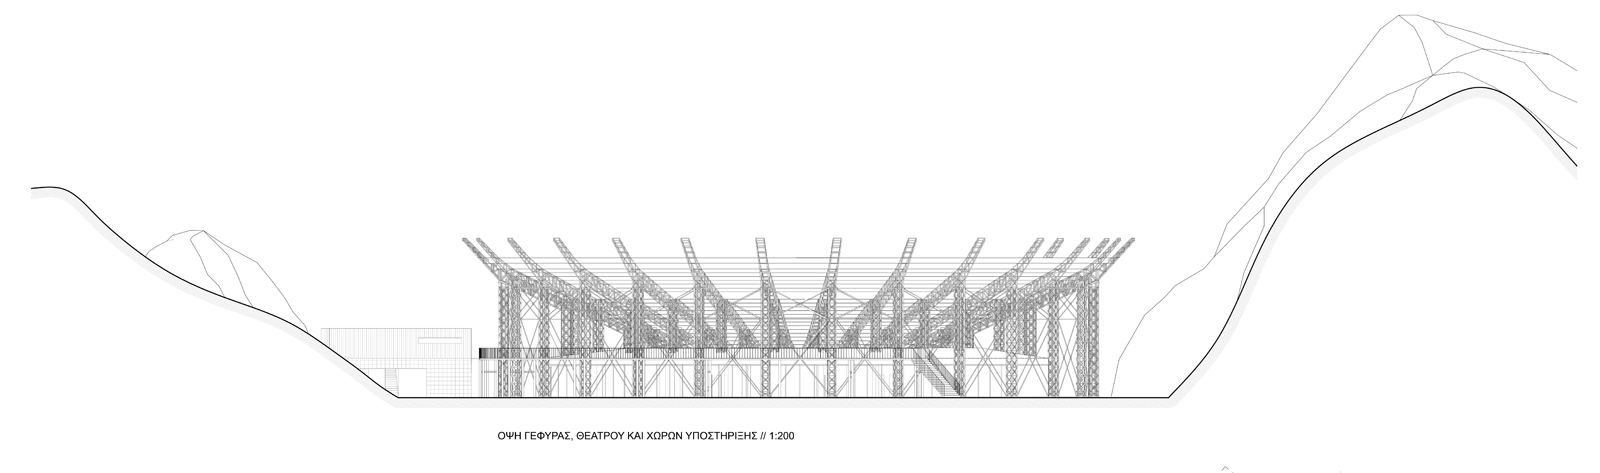 Archisearch Infinity-Meter: SuKu Architects' entry at LYCABETTUS PAN.ORAMA open concept design architectural competition